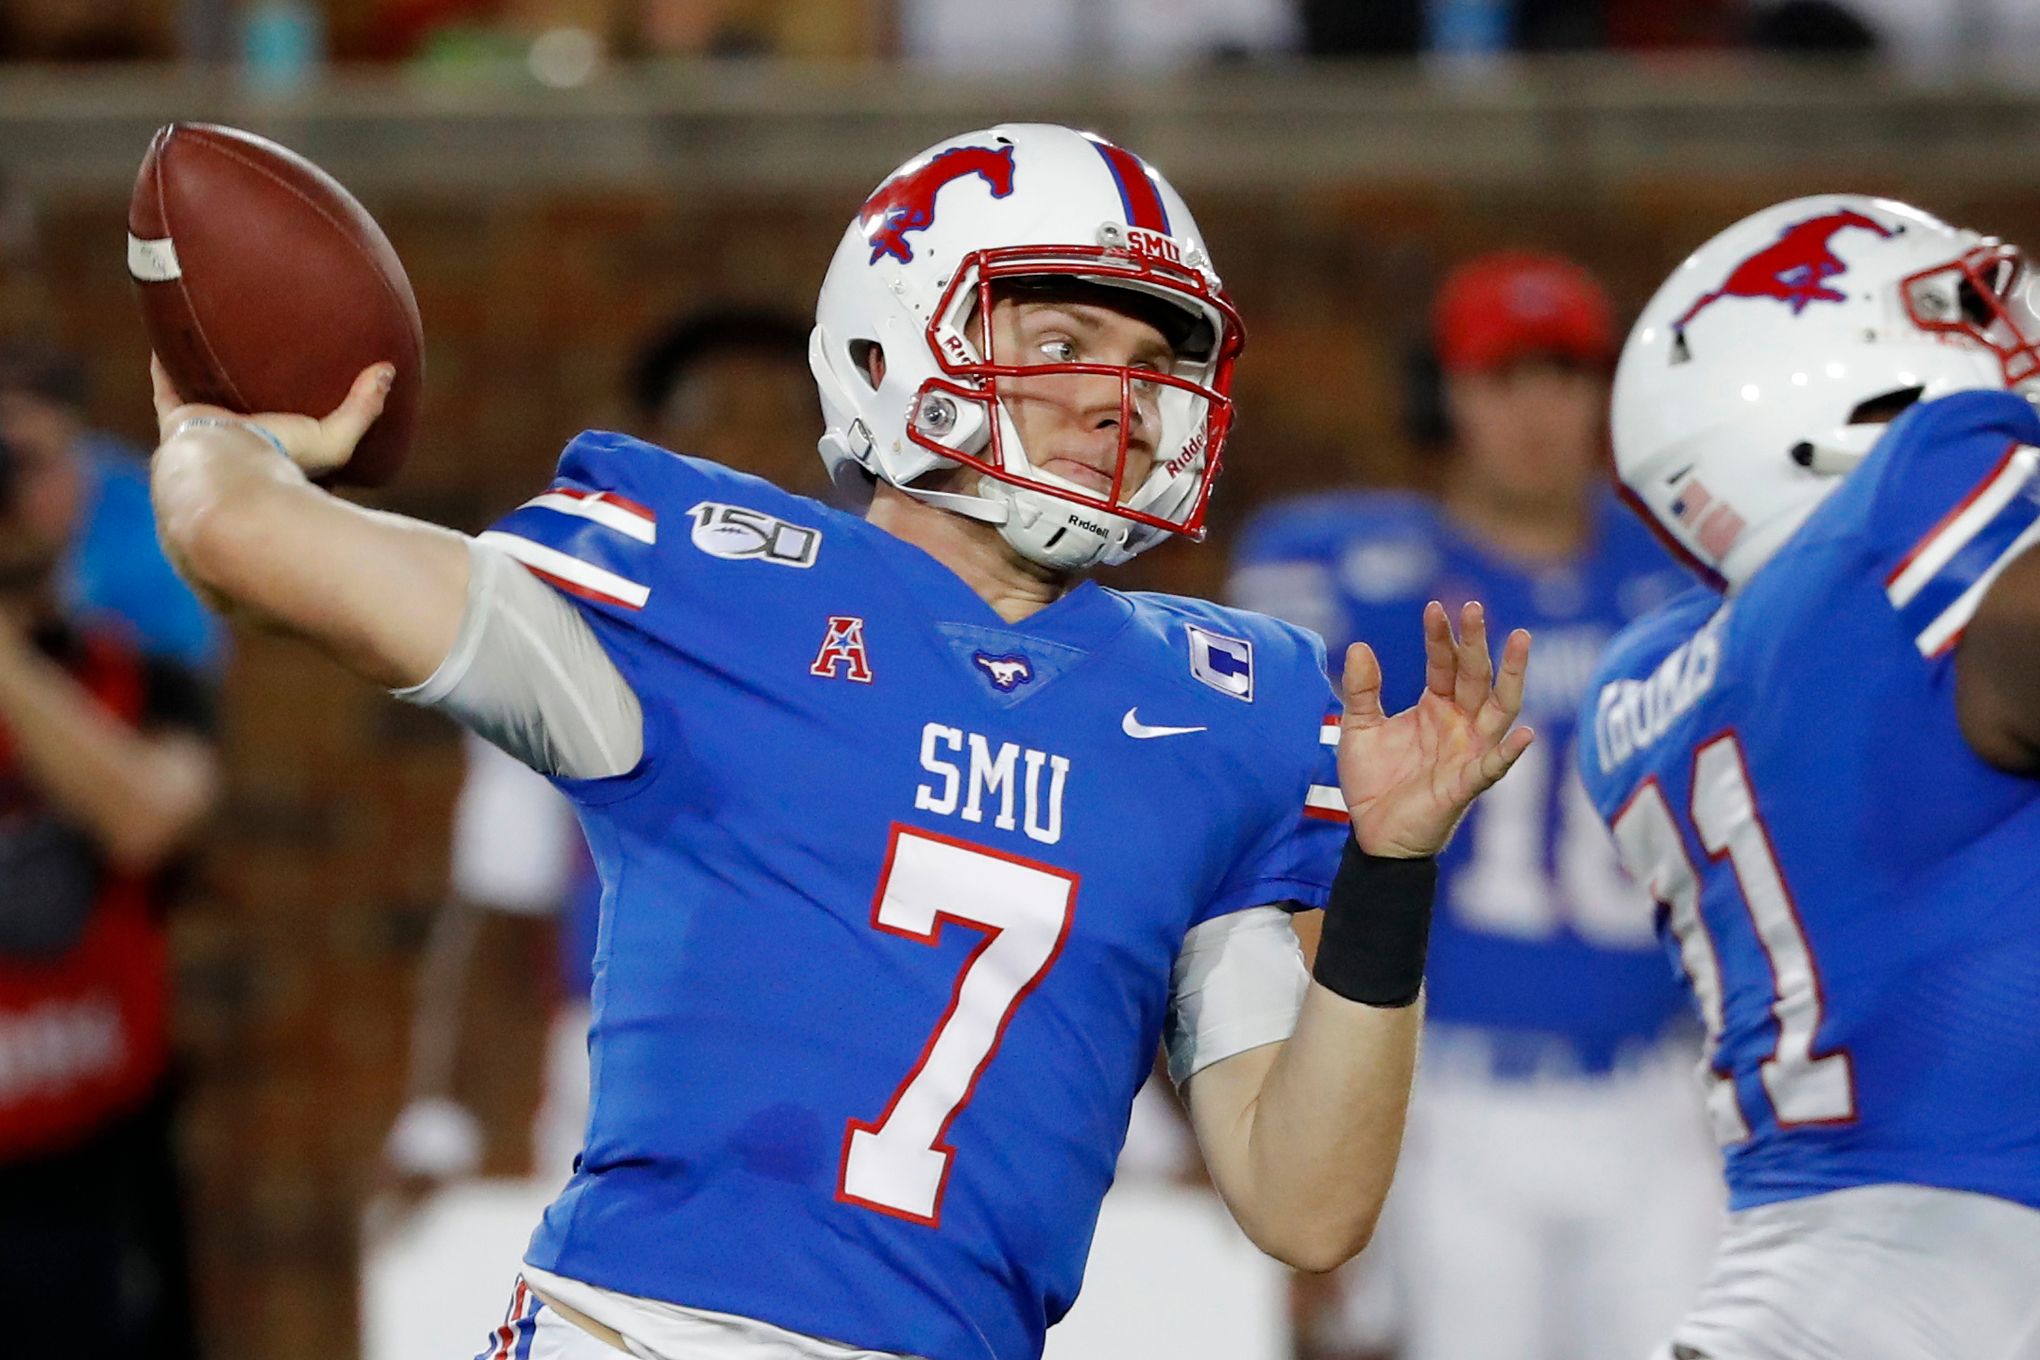 No. 19 SMU undefeated with Buechele and others who came home